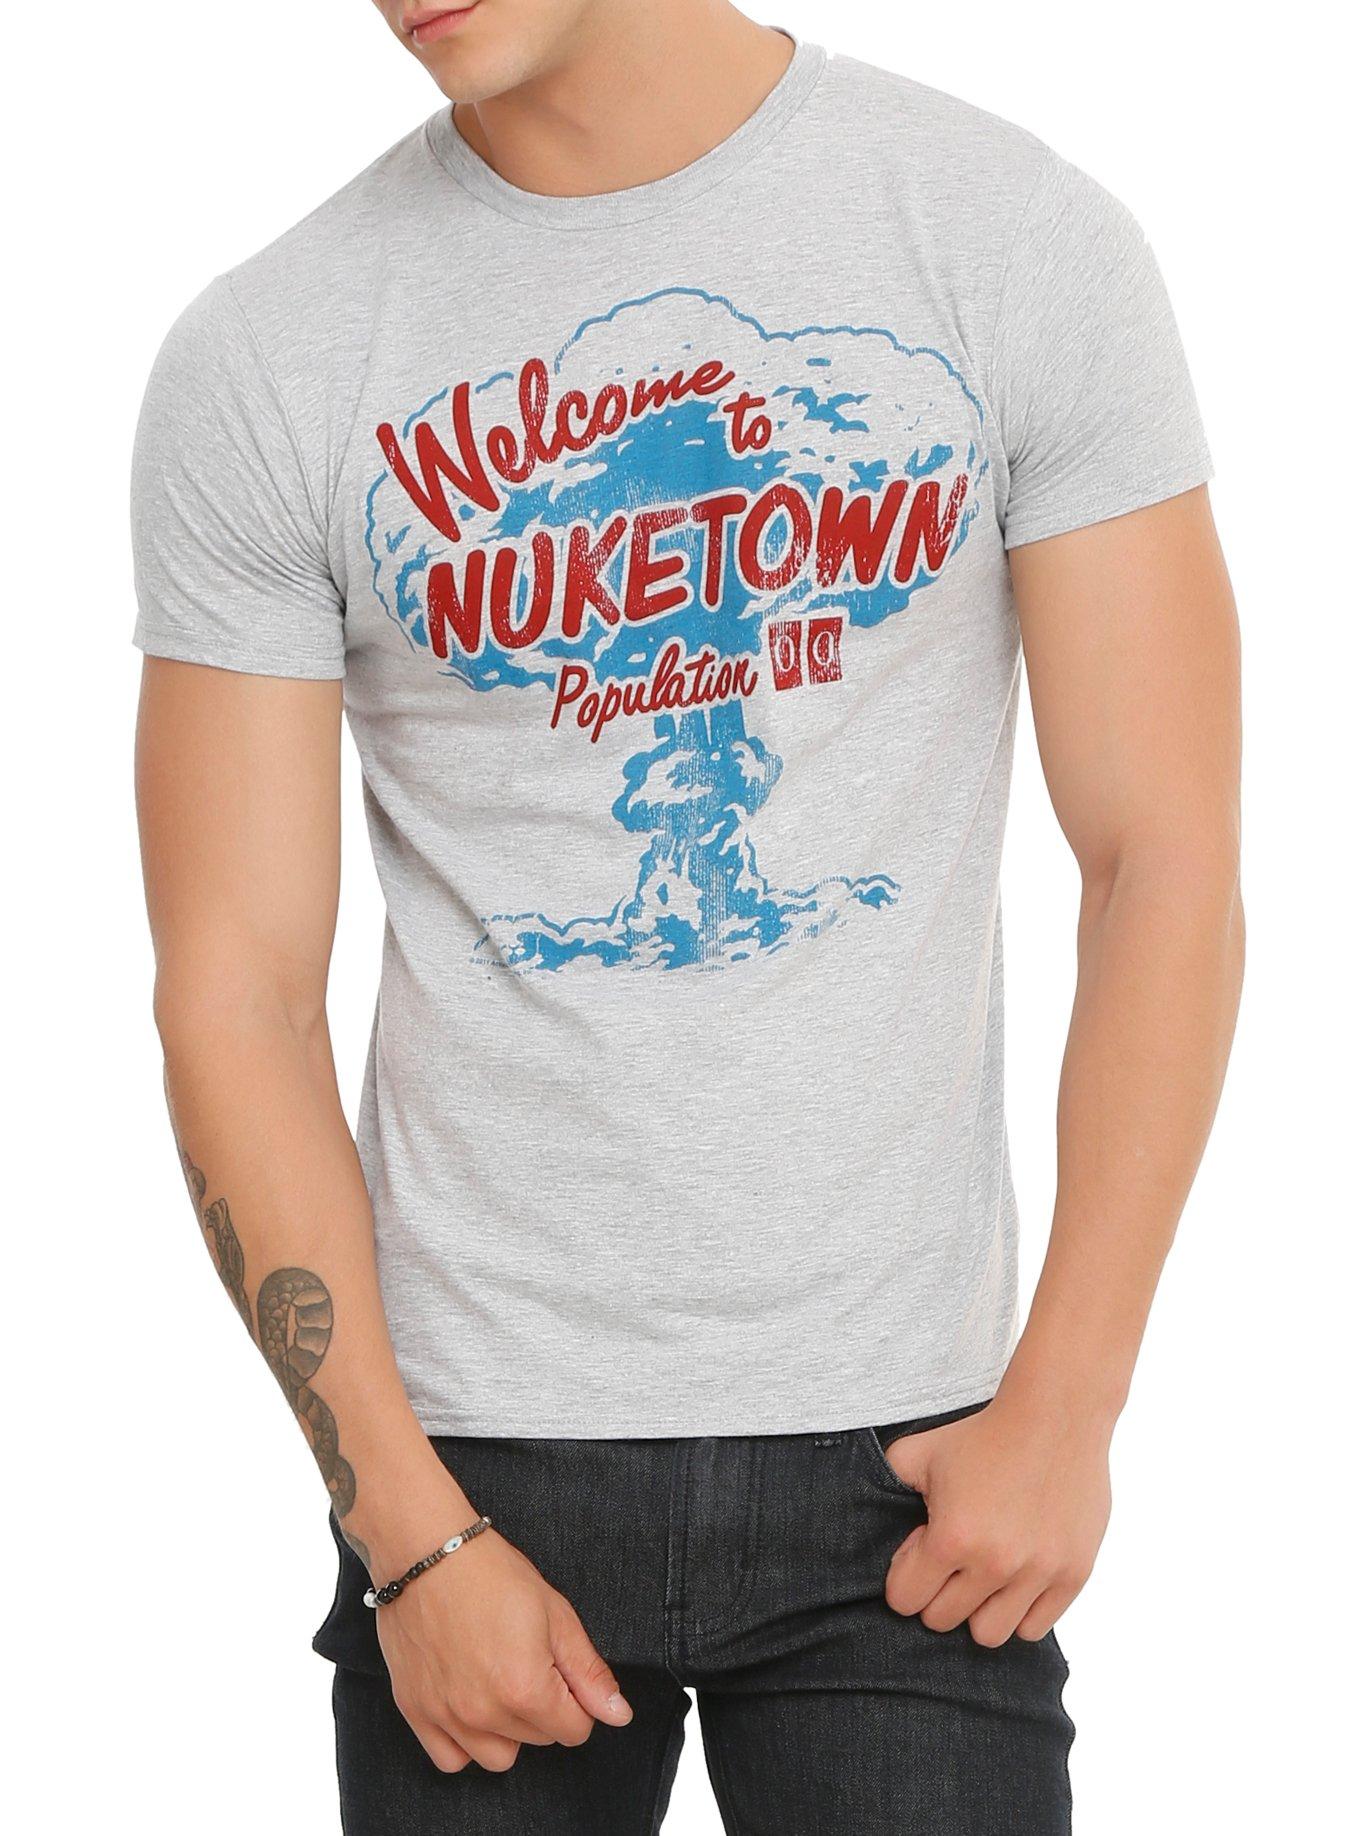 Call Of Duty: Black Ops III Welcome To Nuketown T-Shirt, BLACK, hi-res